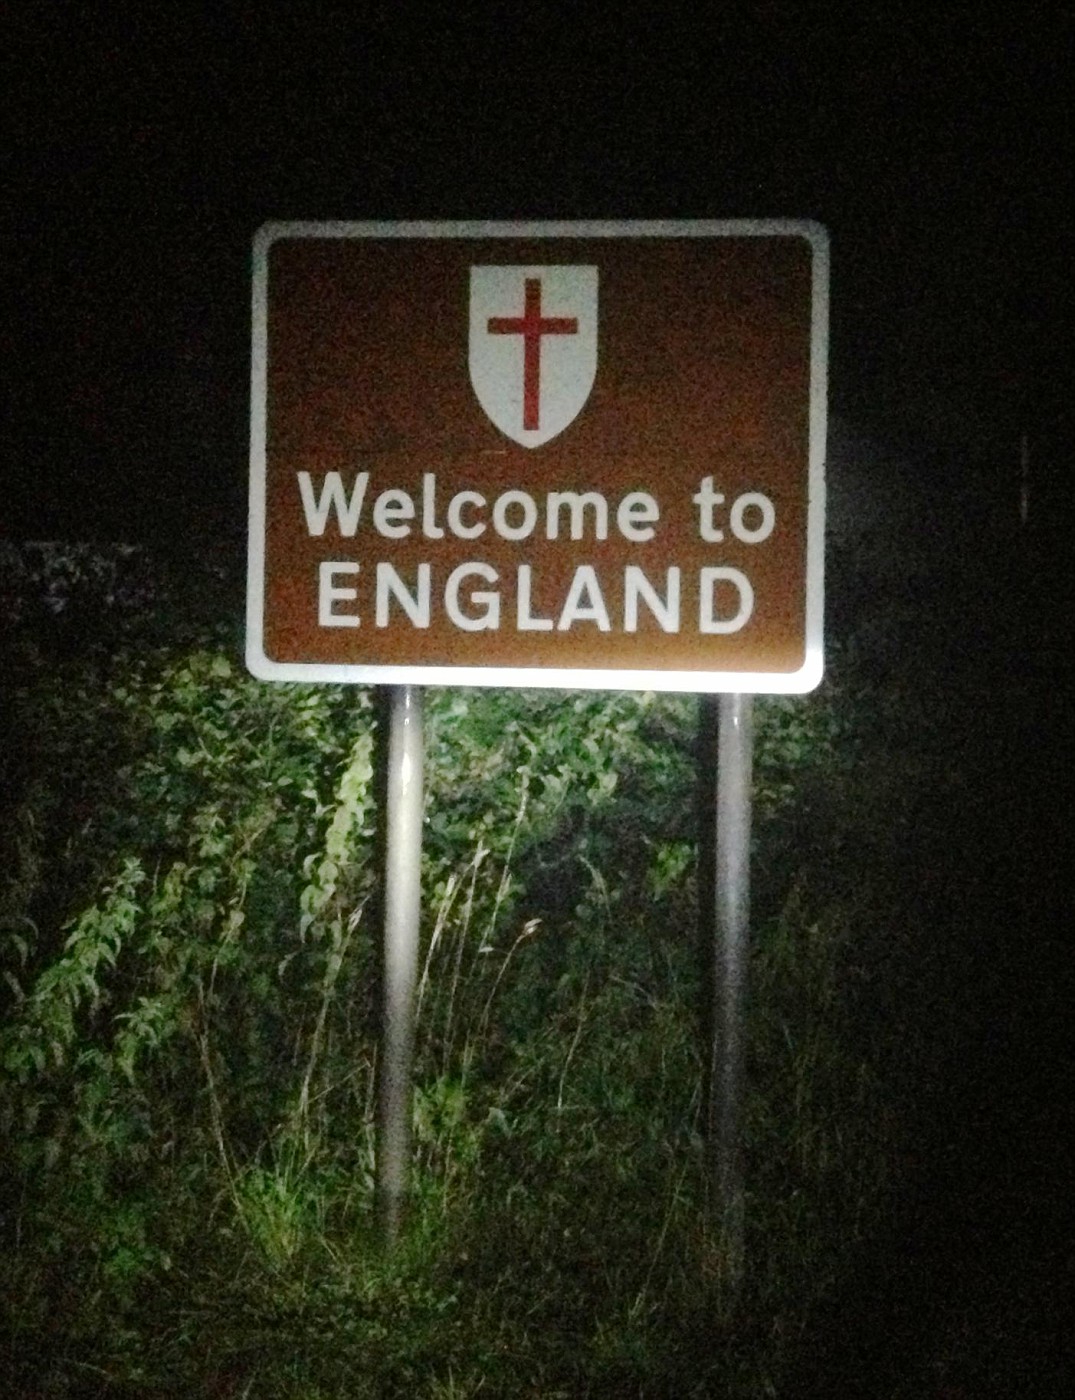 Back in England